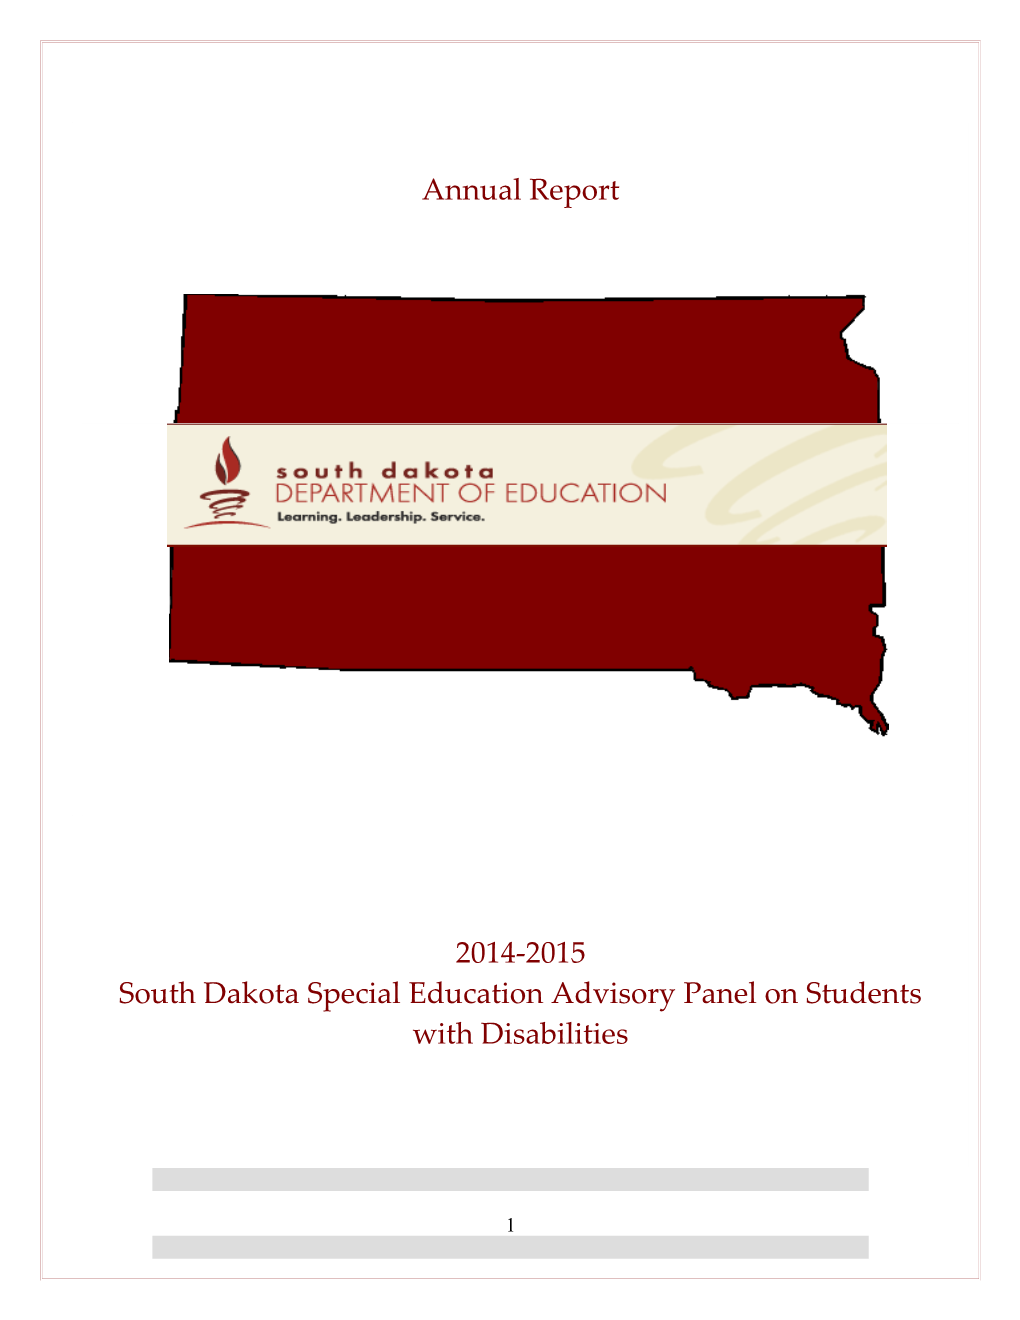 Governor S Special Education Advisory Panel on Students with Disabilities